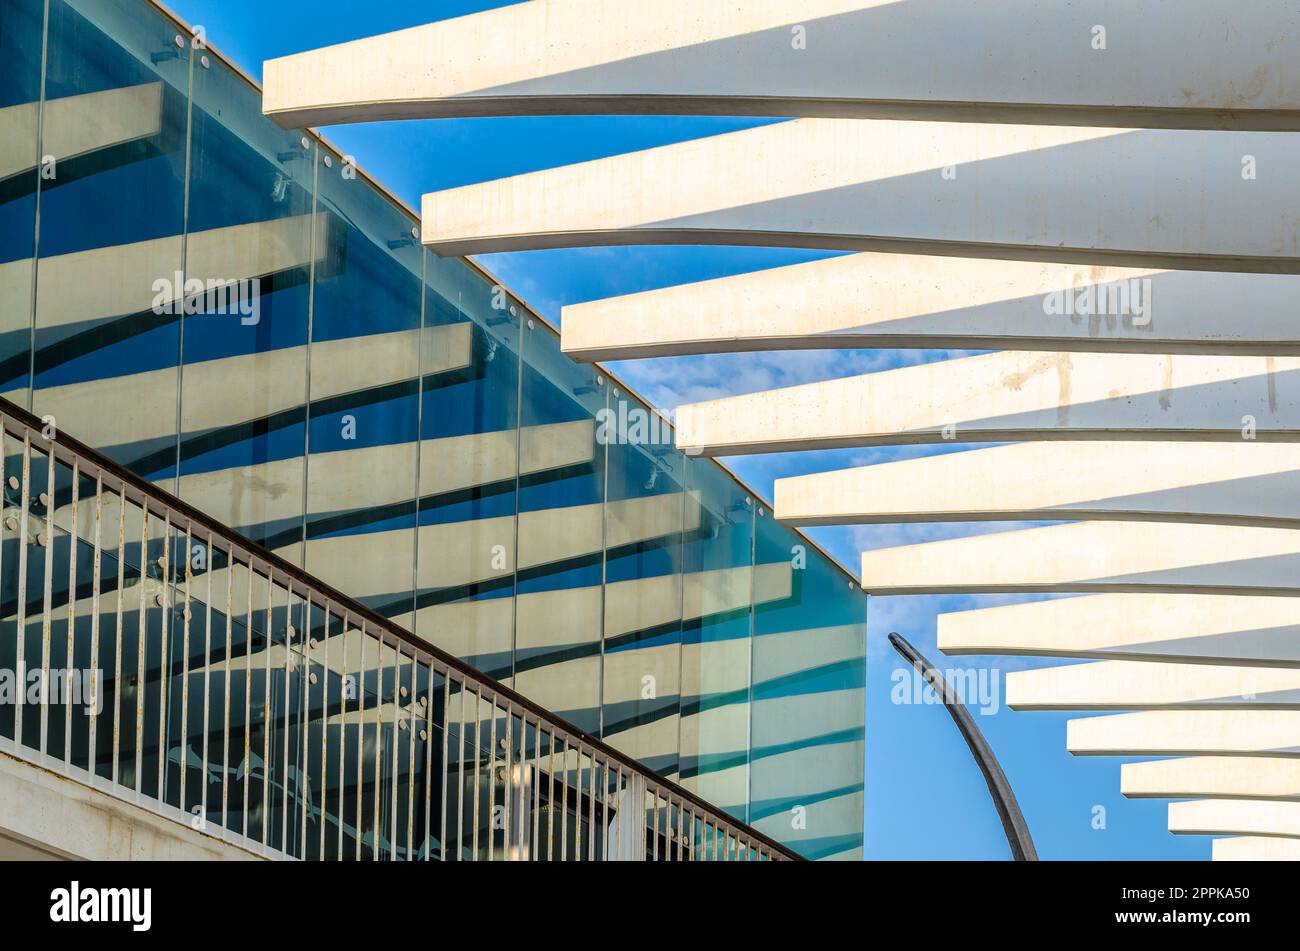 MALAGA, SPAIN - OCTOBER 12, 2021: Modern architecture, detail of the pergola on the seafront in Malaga, Spain, inaugurated in 2011 Stock Photo